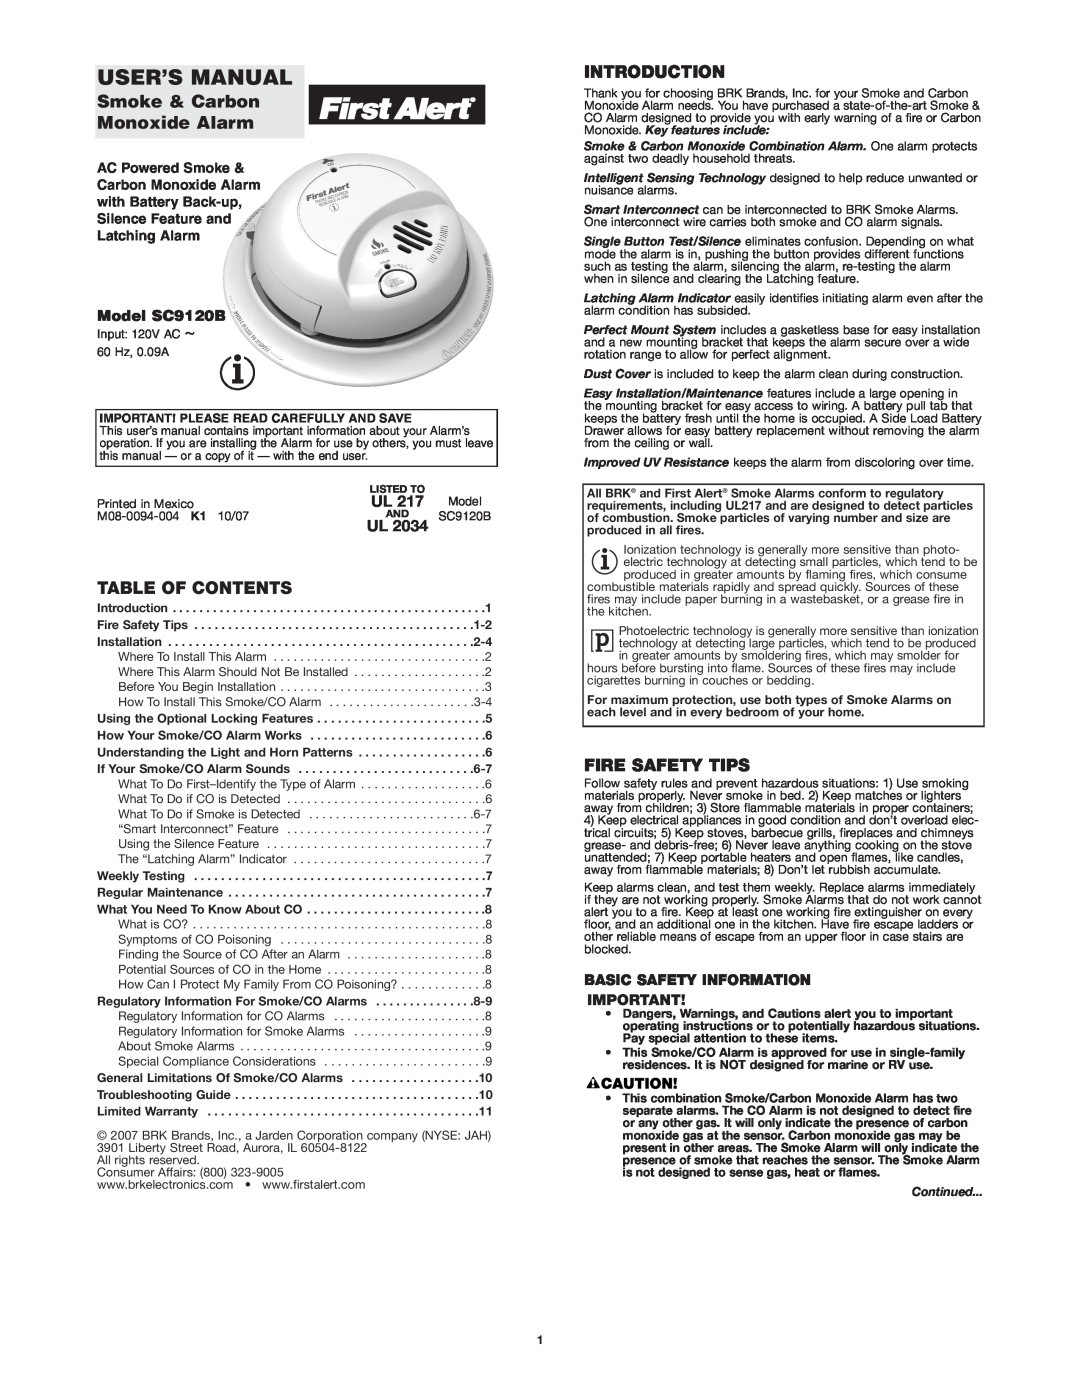 First Alert SC9120B user manual Table Of Contents, Introduction, Fire Safety Tips, Basic Safety Information, Continued 